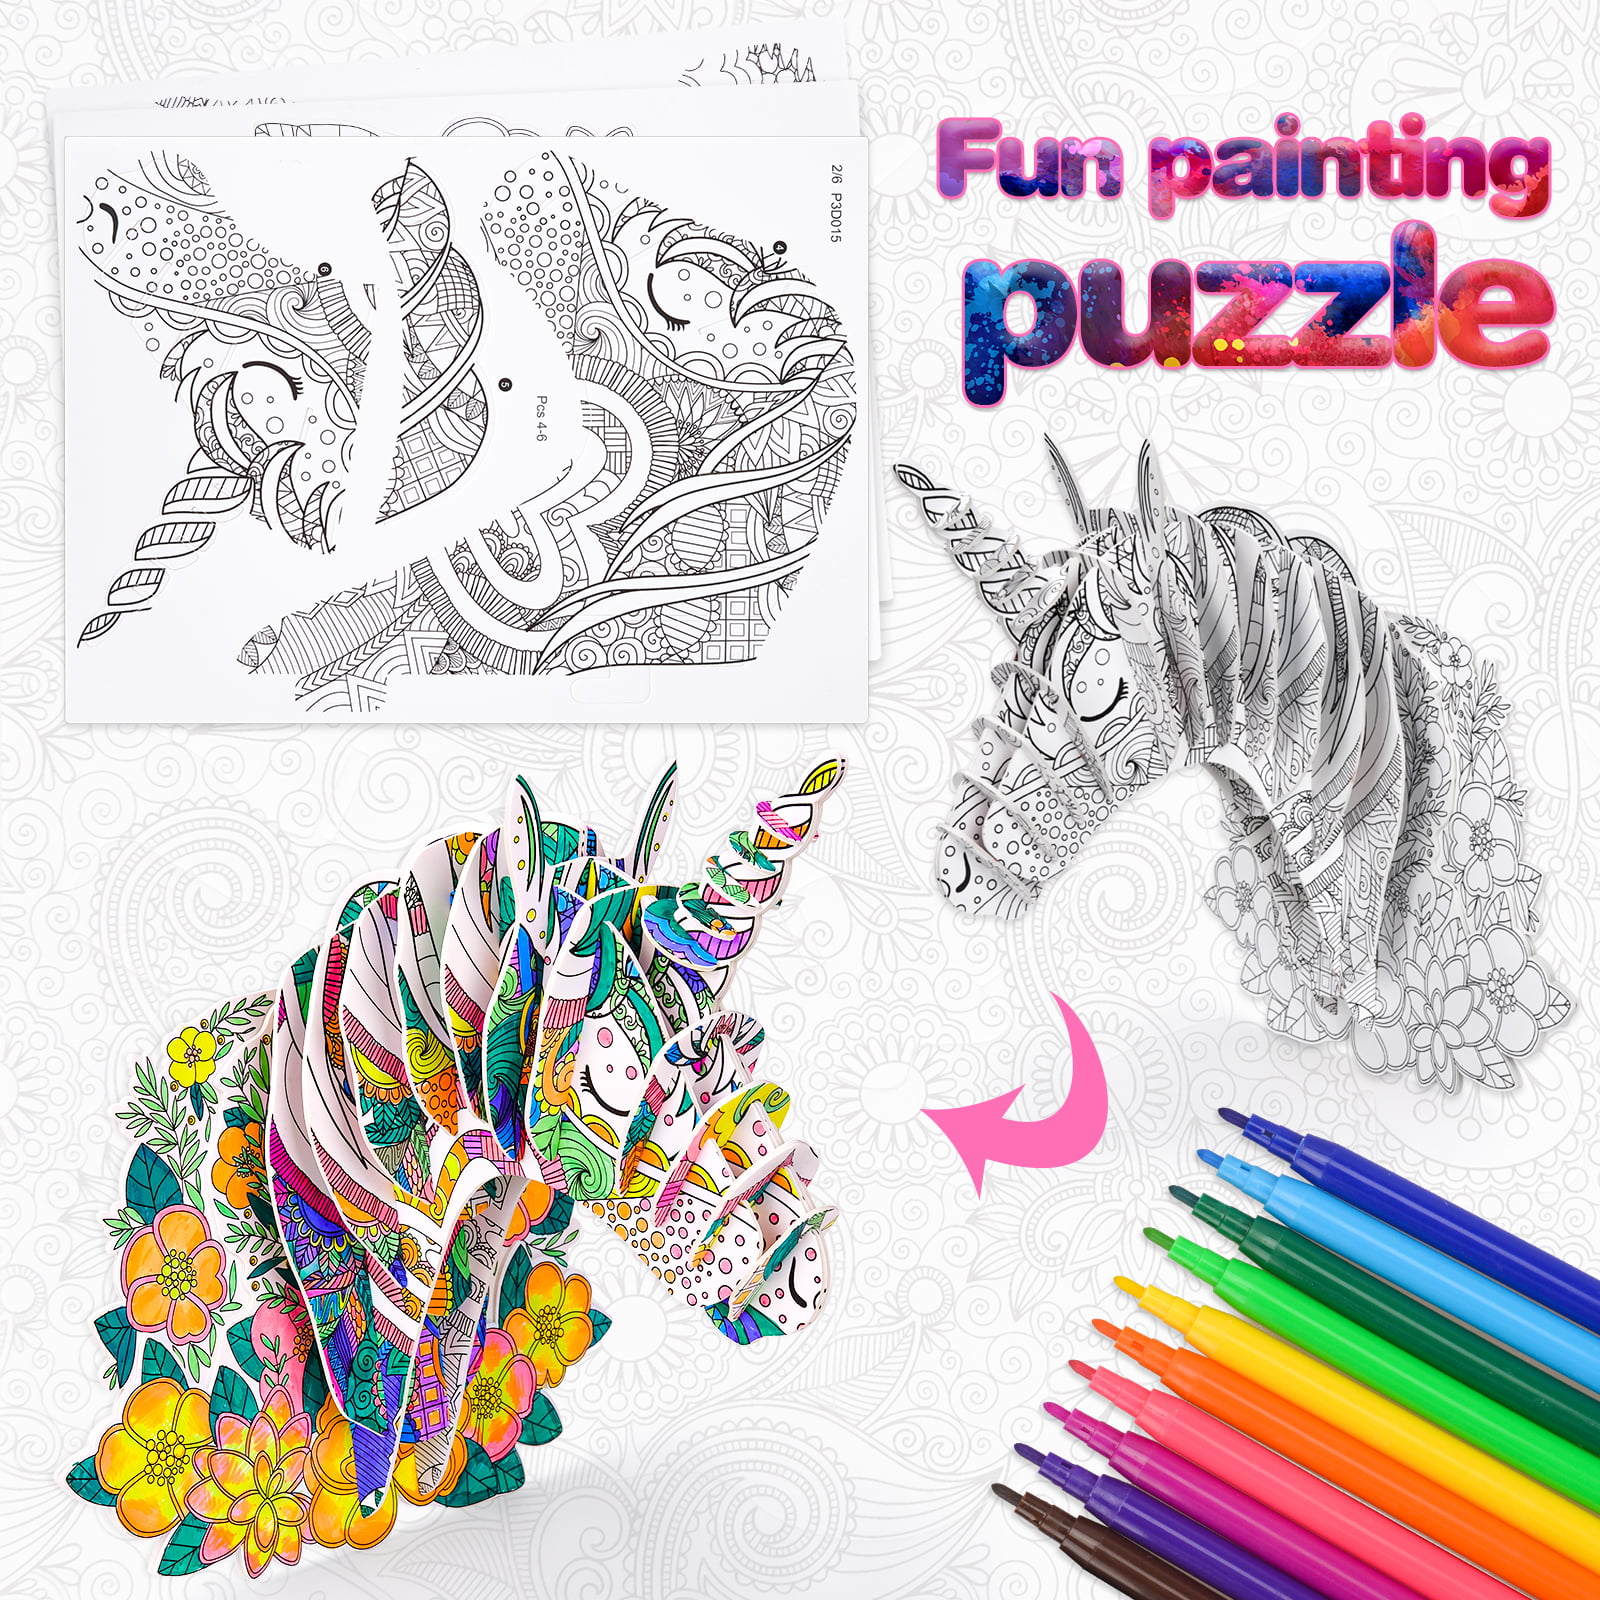 3D Coloring Puzzle Kit for 7 8 9 10 11 12 Year Old Girl Boys,Guitar  Painting Puzzle Toy for Kids Age 6-12 Craft Kit for Girl Age 9 10 11  Birthday Gift for 8-12 Years Old Girl 